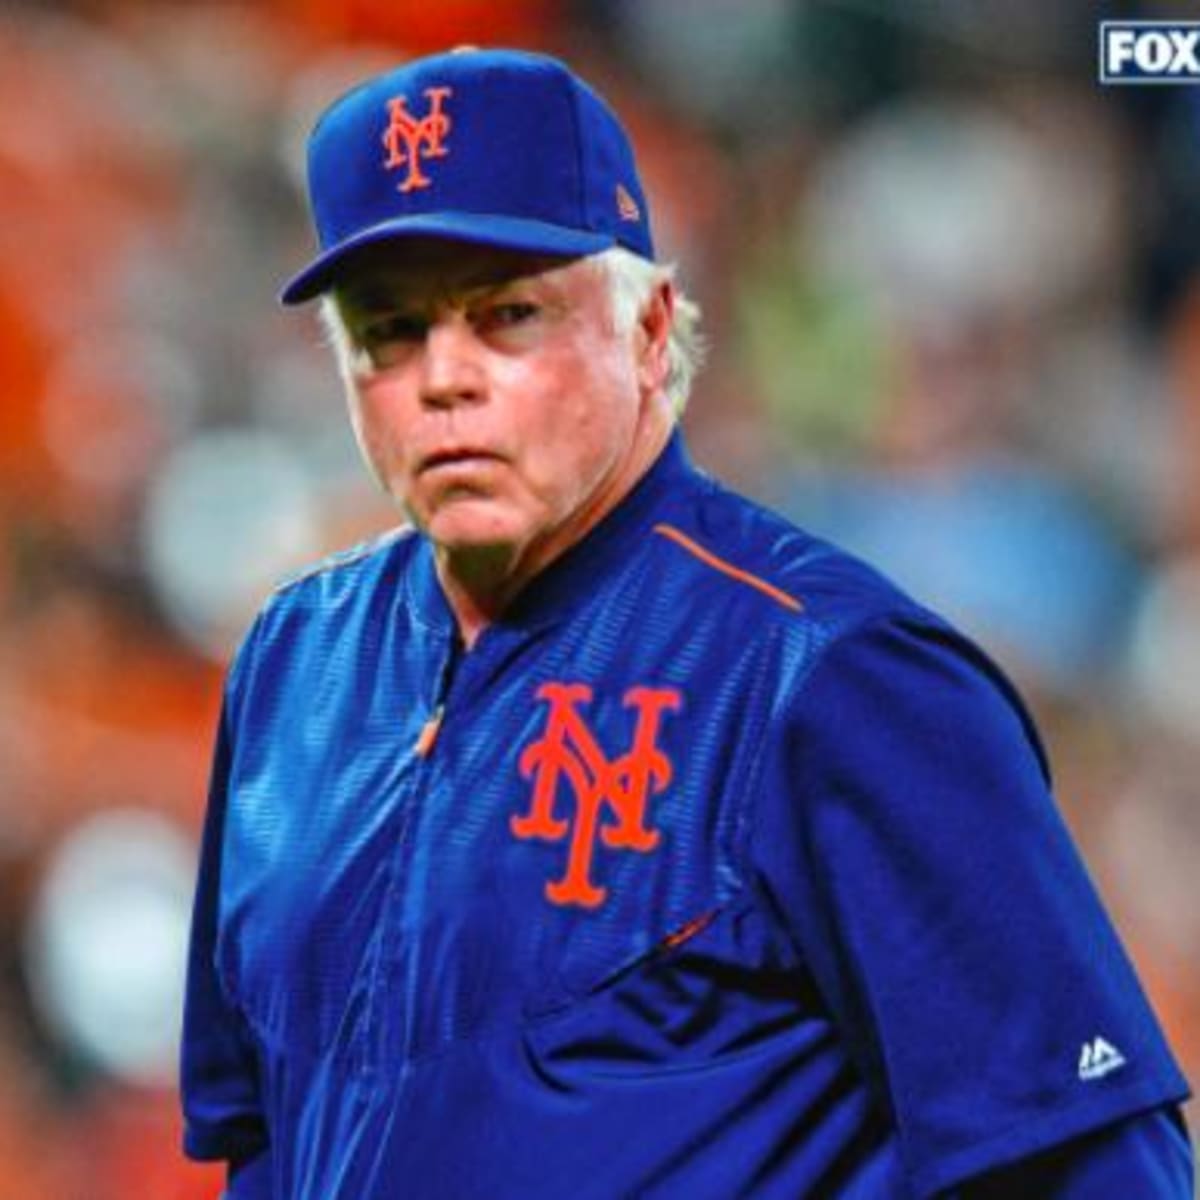 Century's Buck Showalter Out As New York Mets' Manager